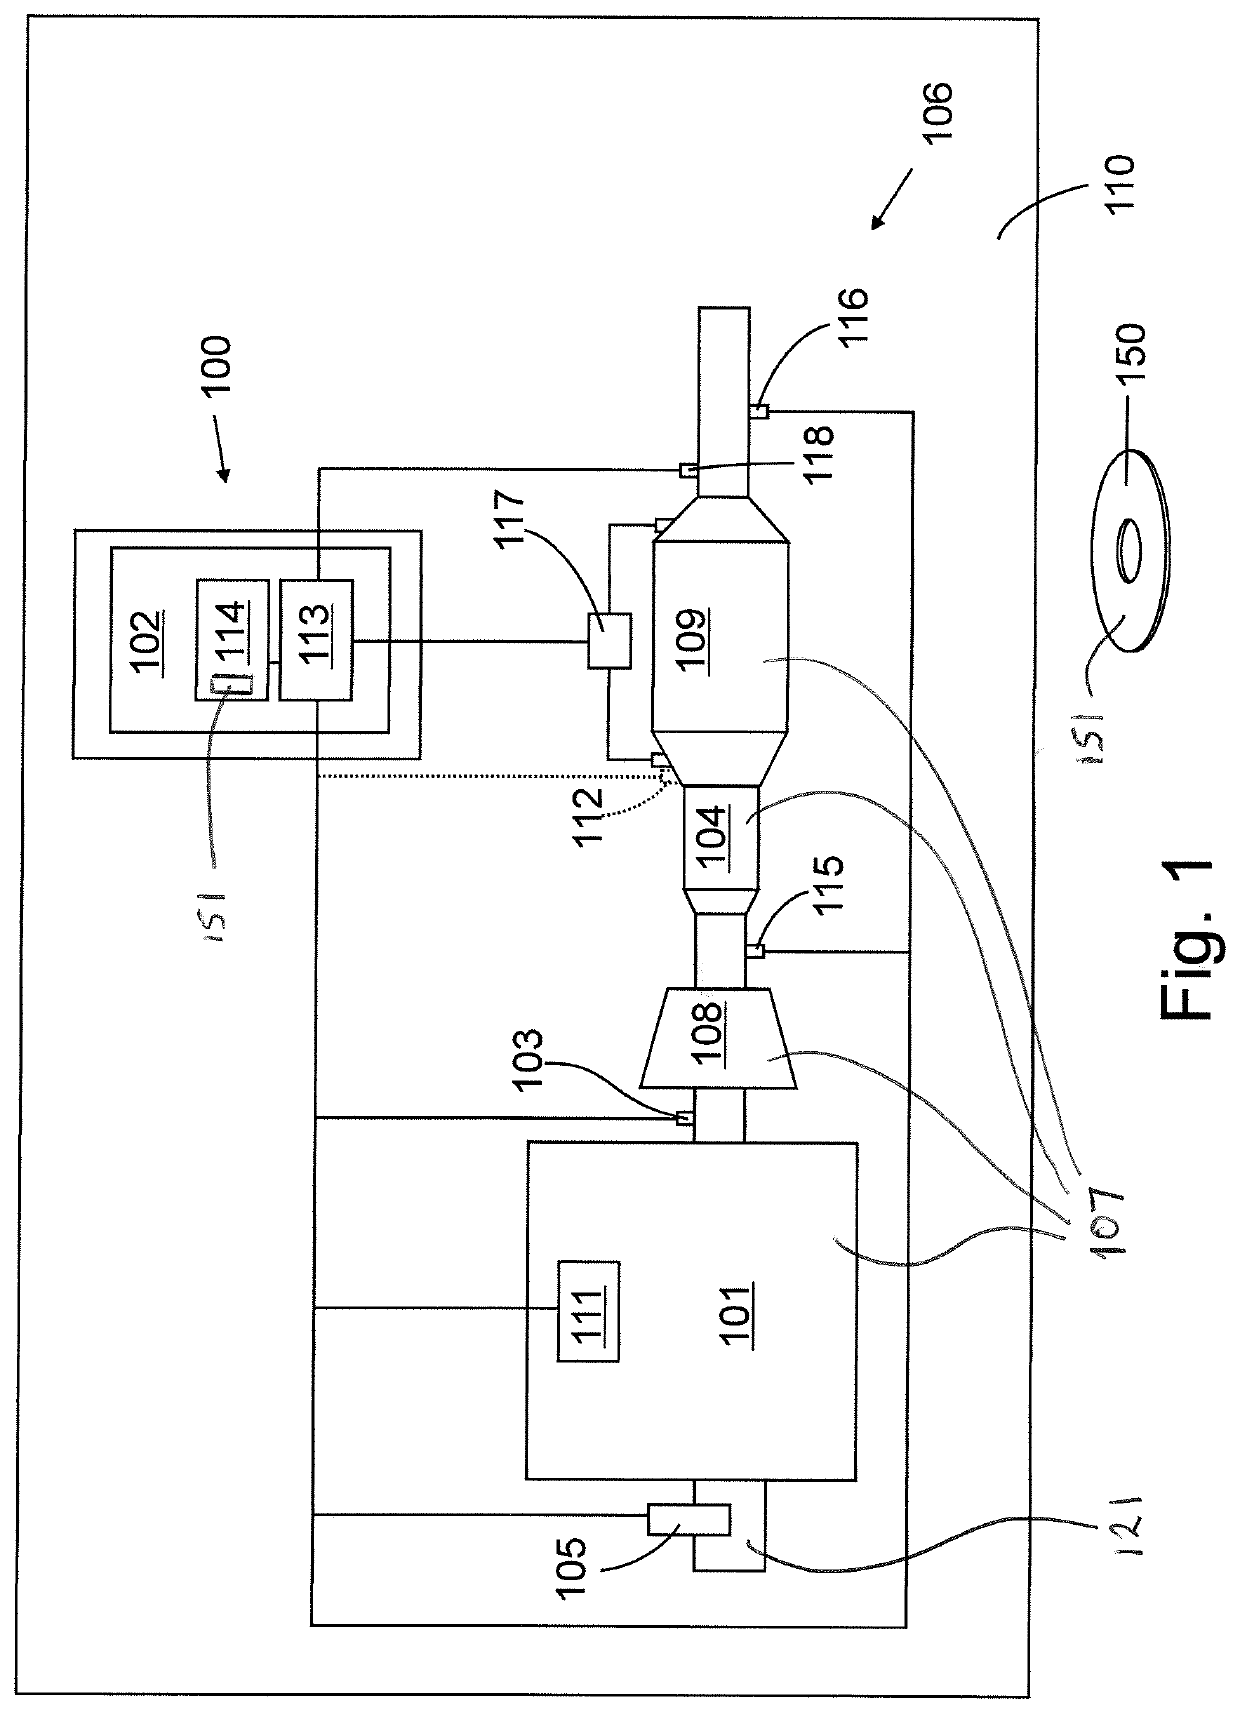 Control of aftertreatment of an internal combustion engine